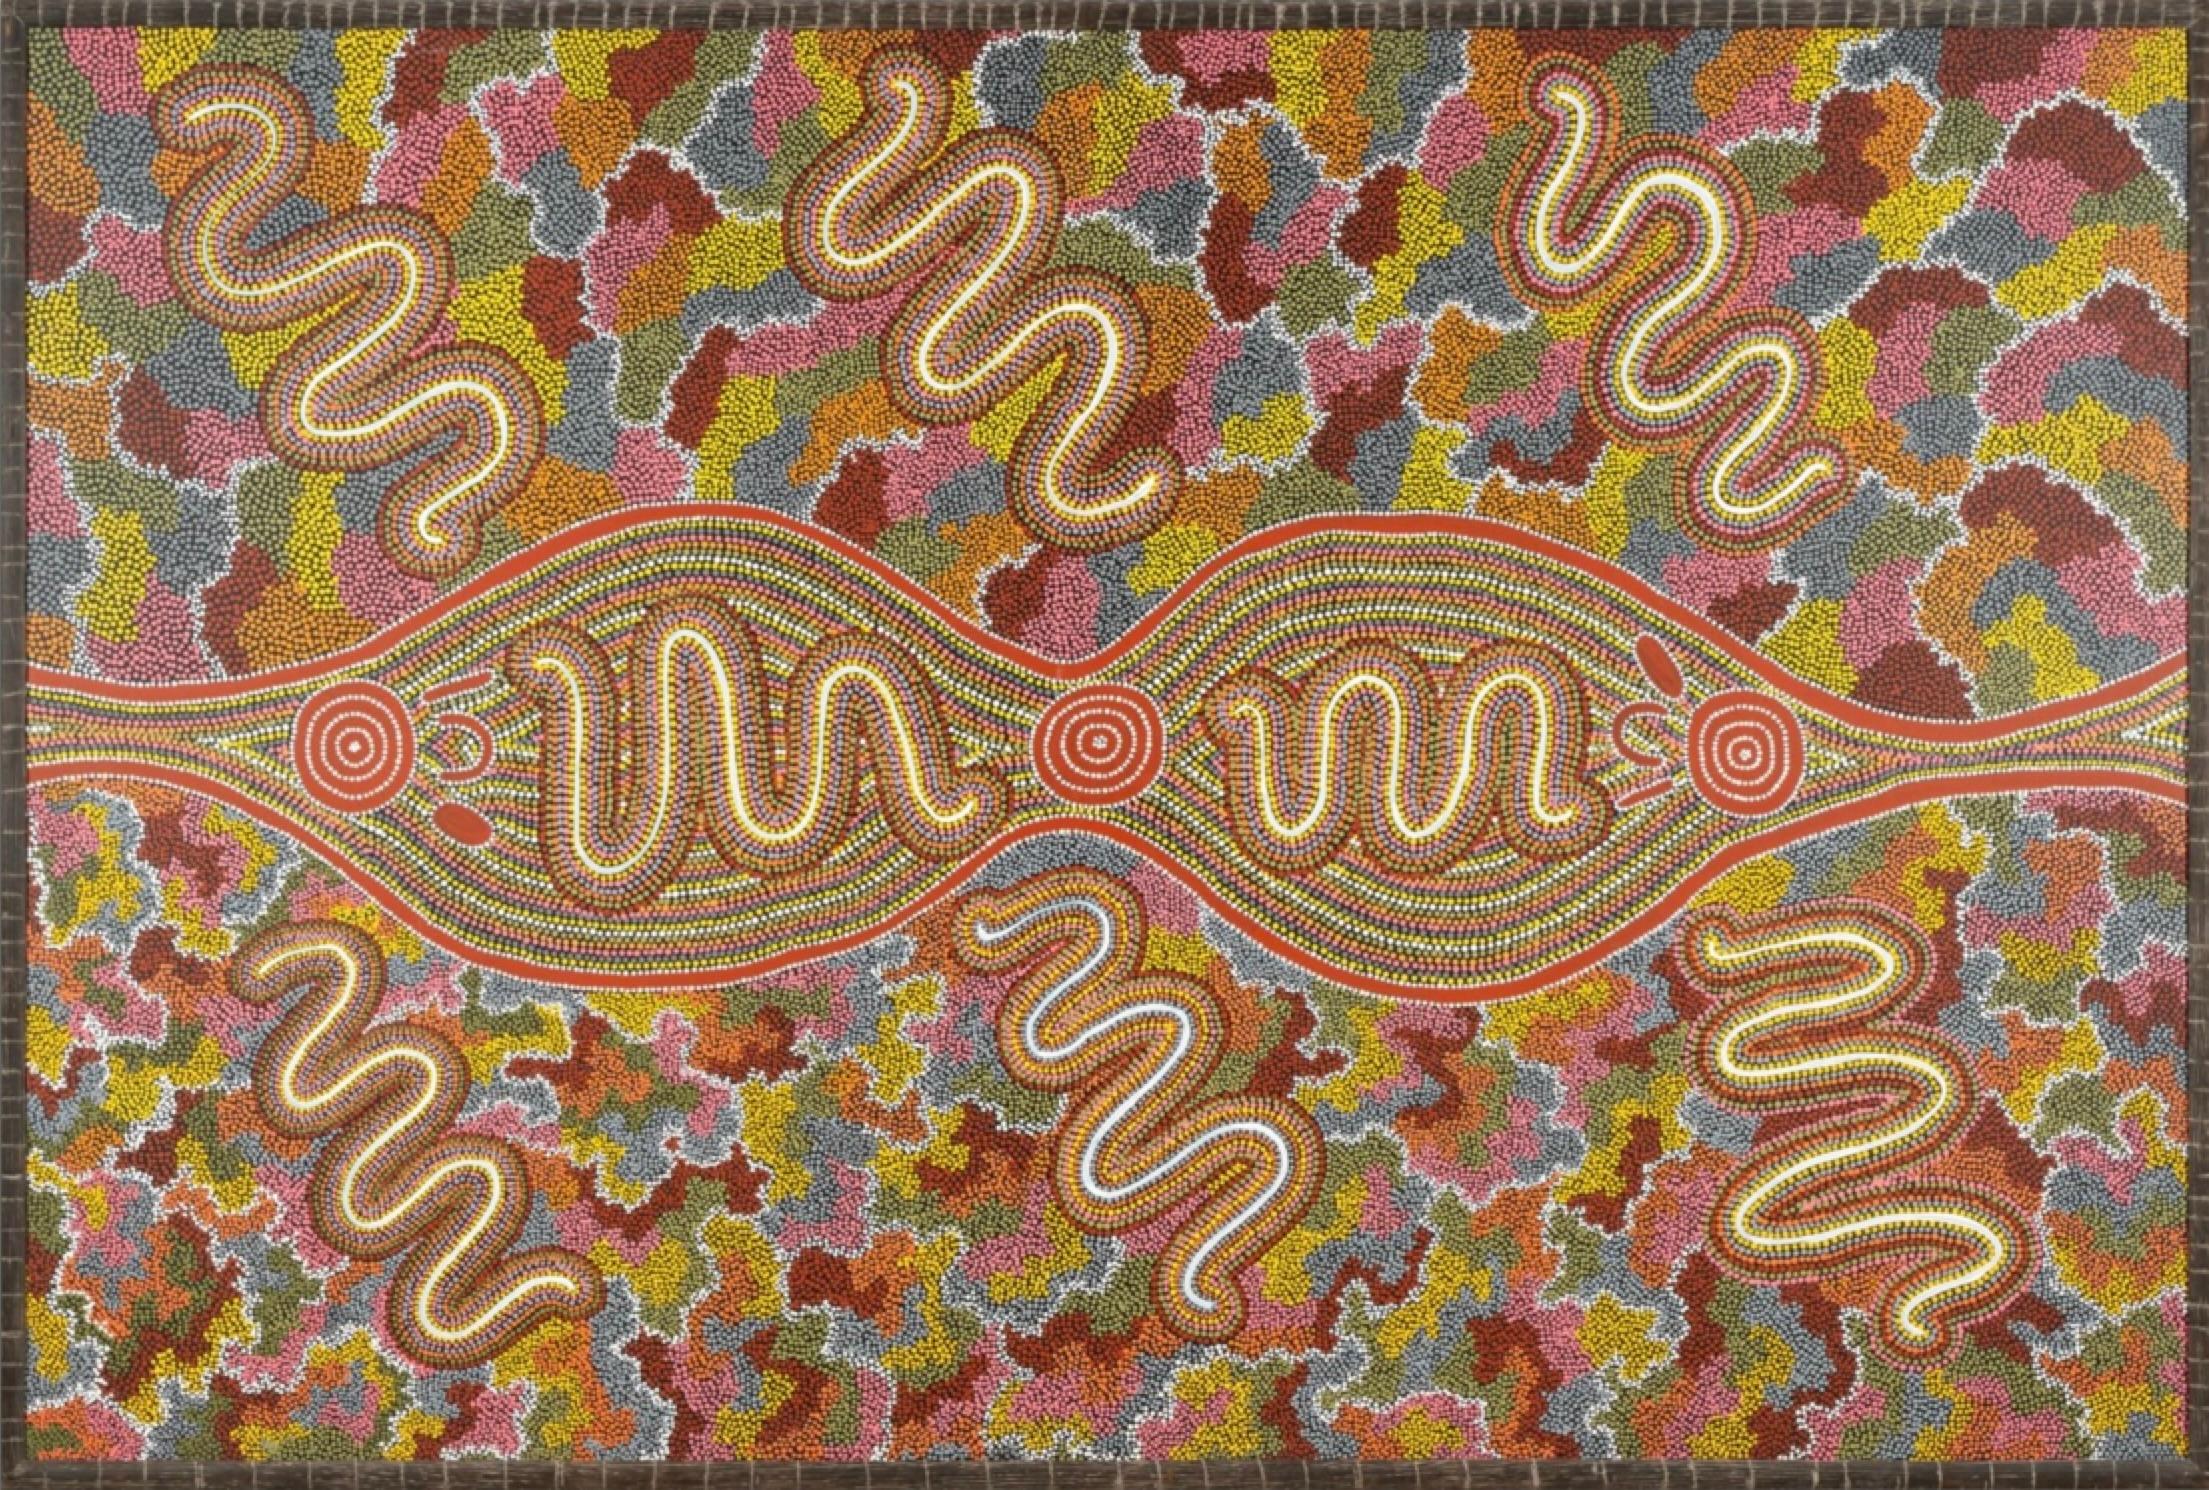 Papunya Tula Artists Pty. Ltd., Alice Springs The Holmes Ã Court Collection, Perth Austral Gallery, Saint Louis, MO; acquired in 1996; Richard Kelton Collection, Santa Monica; Exhibited at the Australian Consulate, Los Angeles, CA, 22 August 2003 to